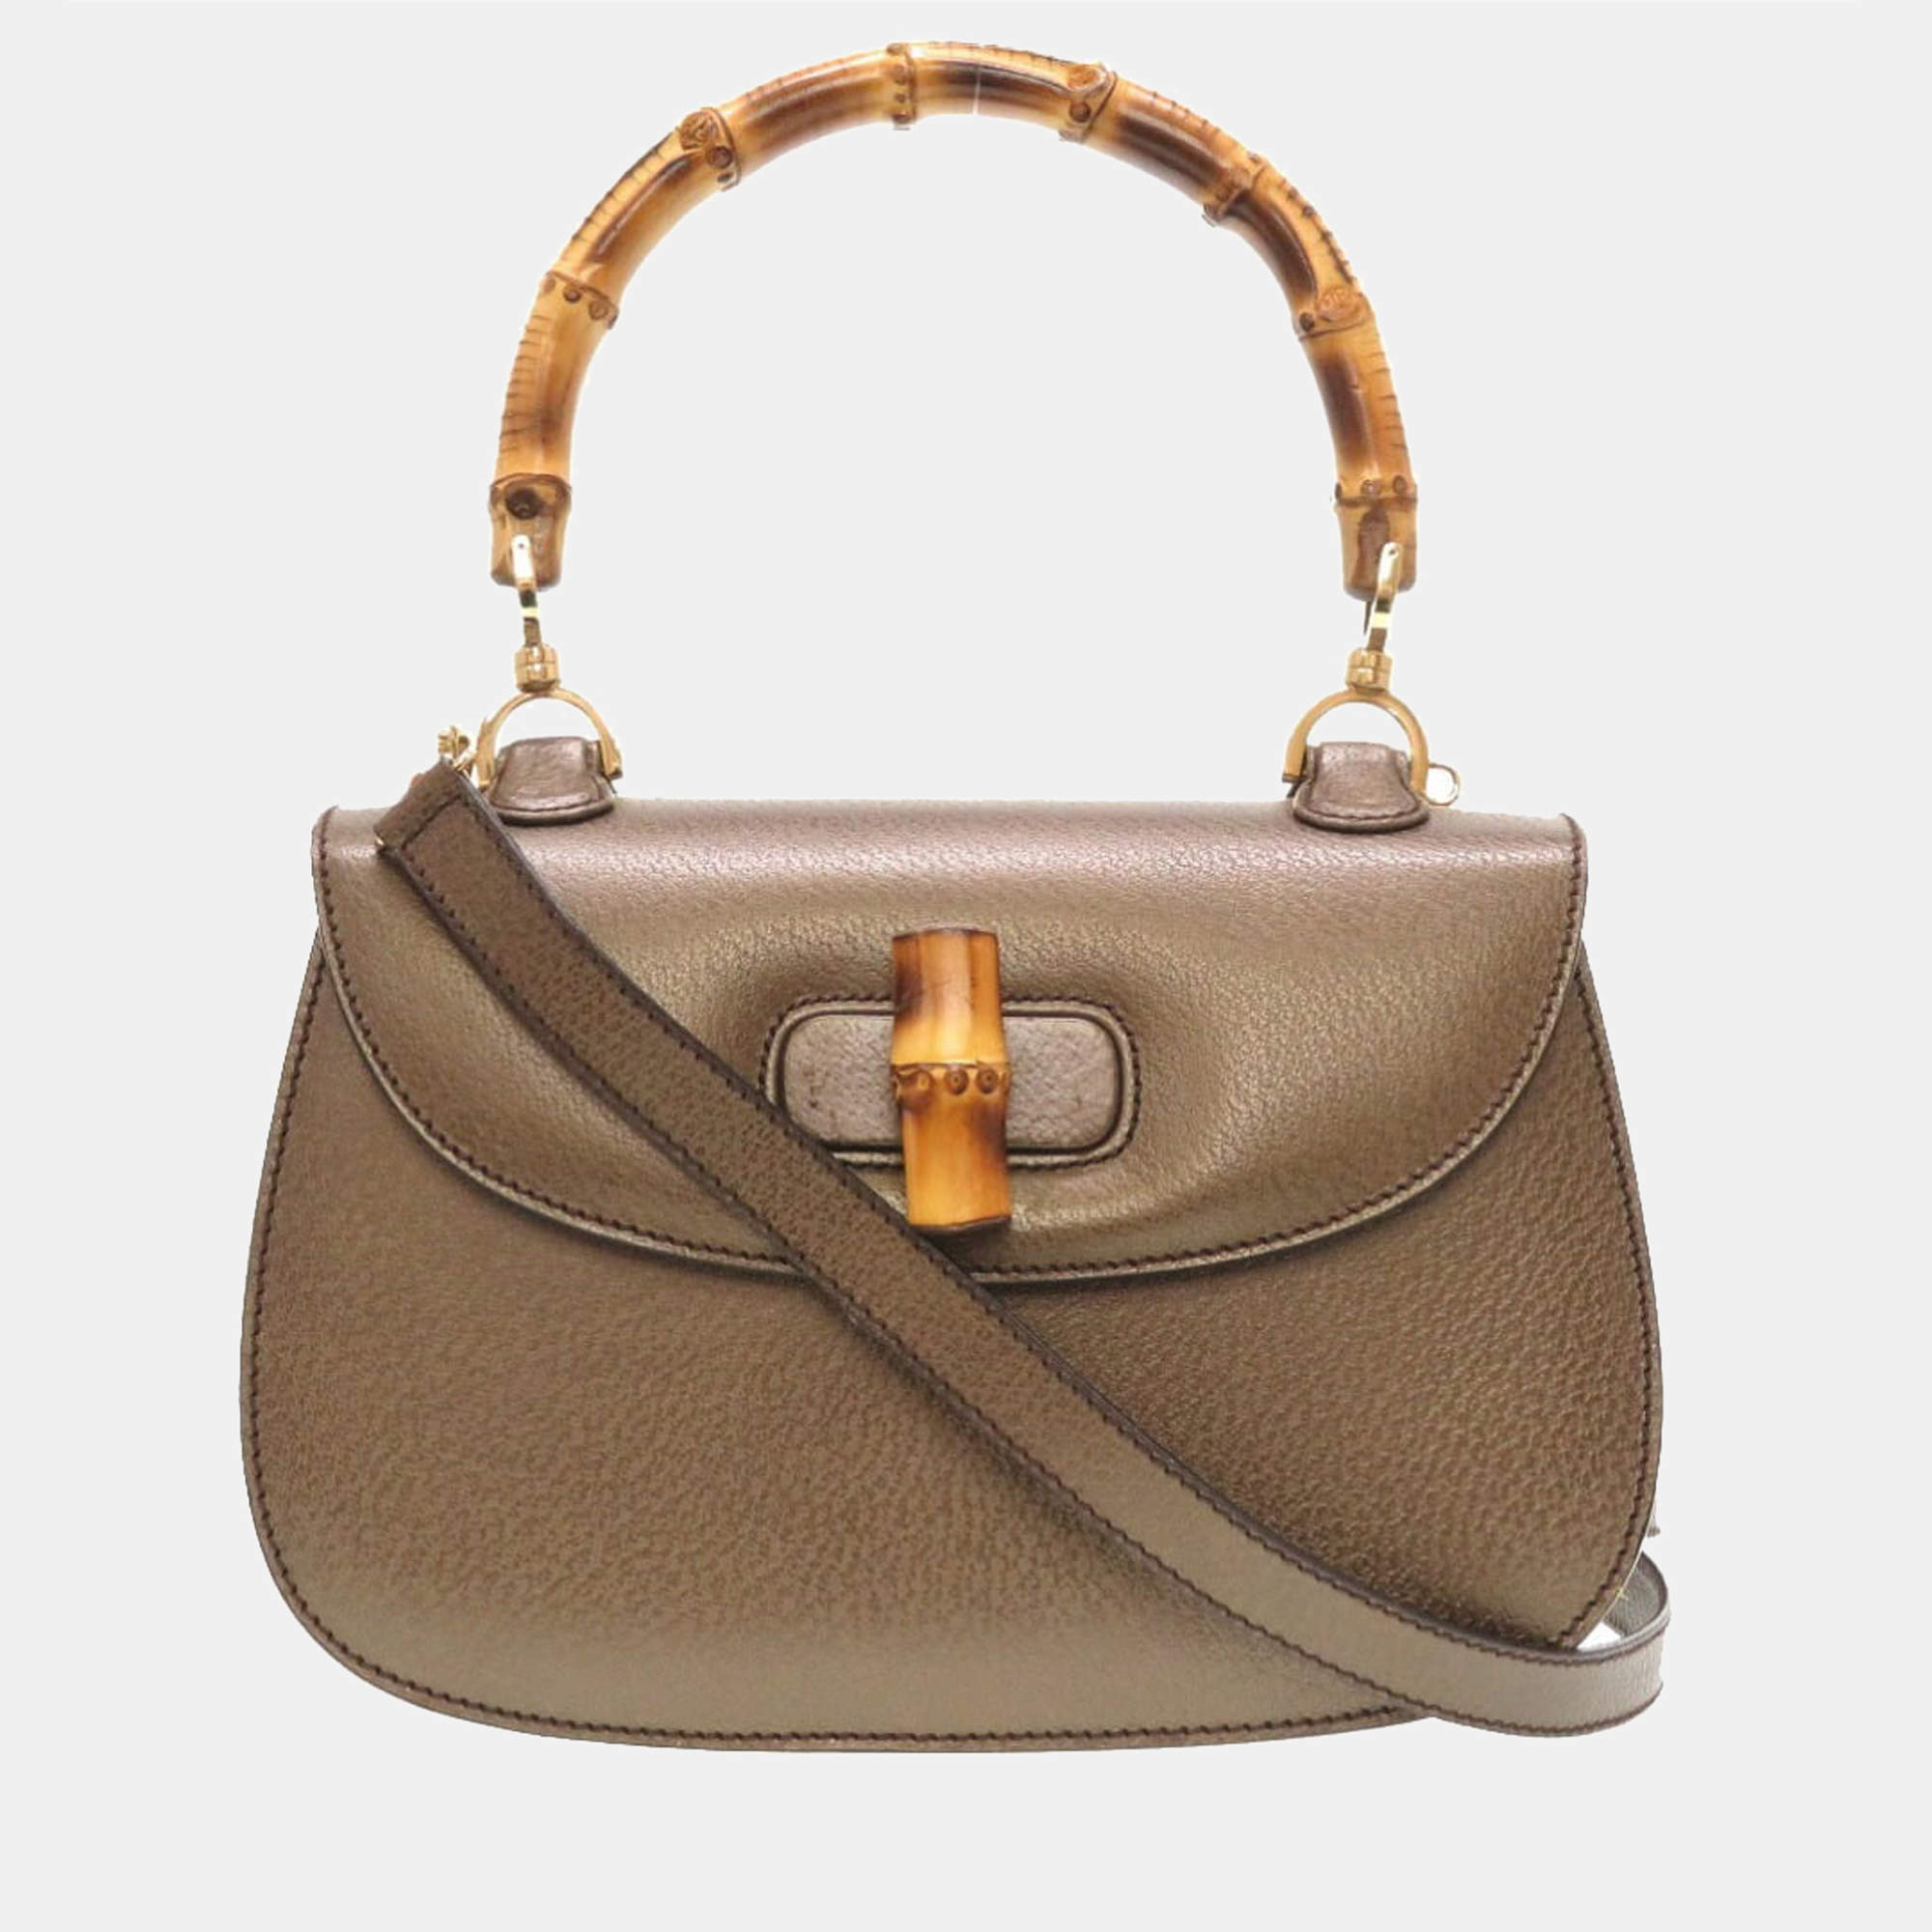 Gucci Bamboo 1947 medium top handle bag in brown leather